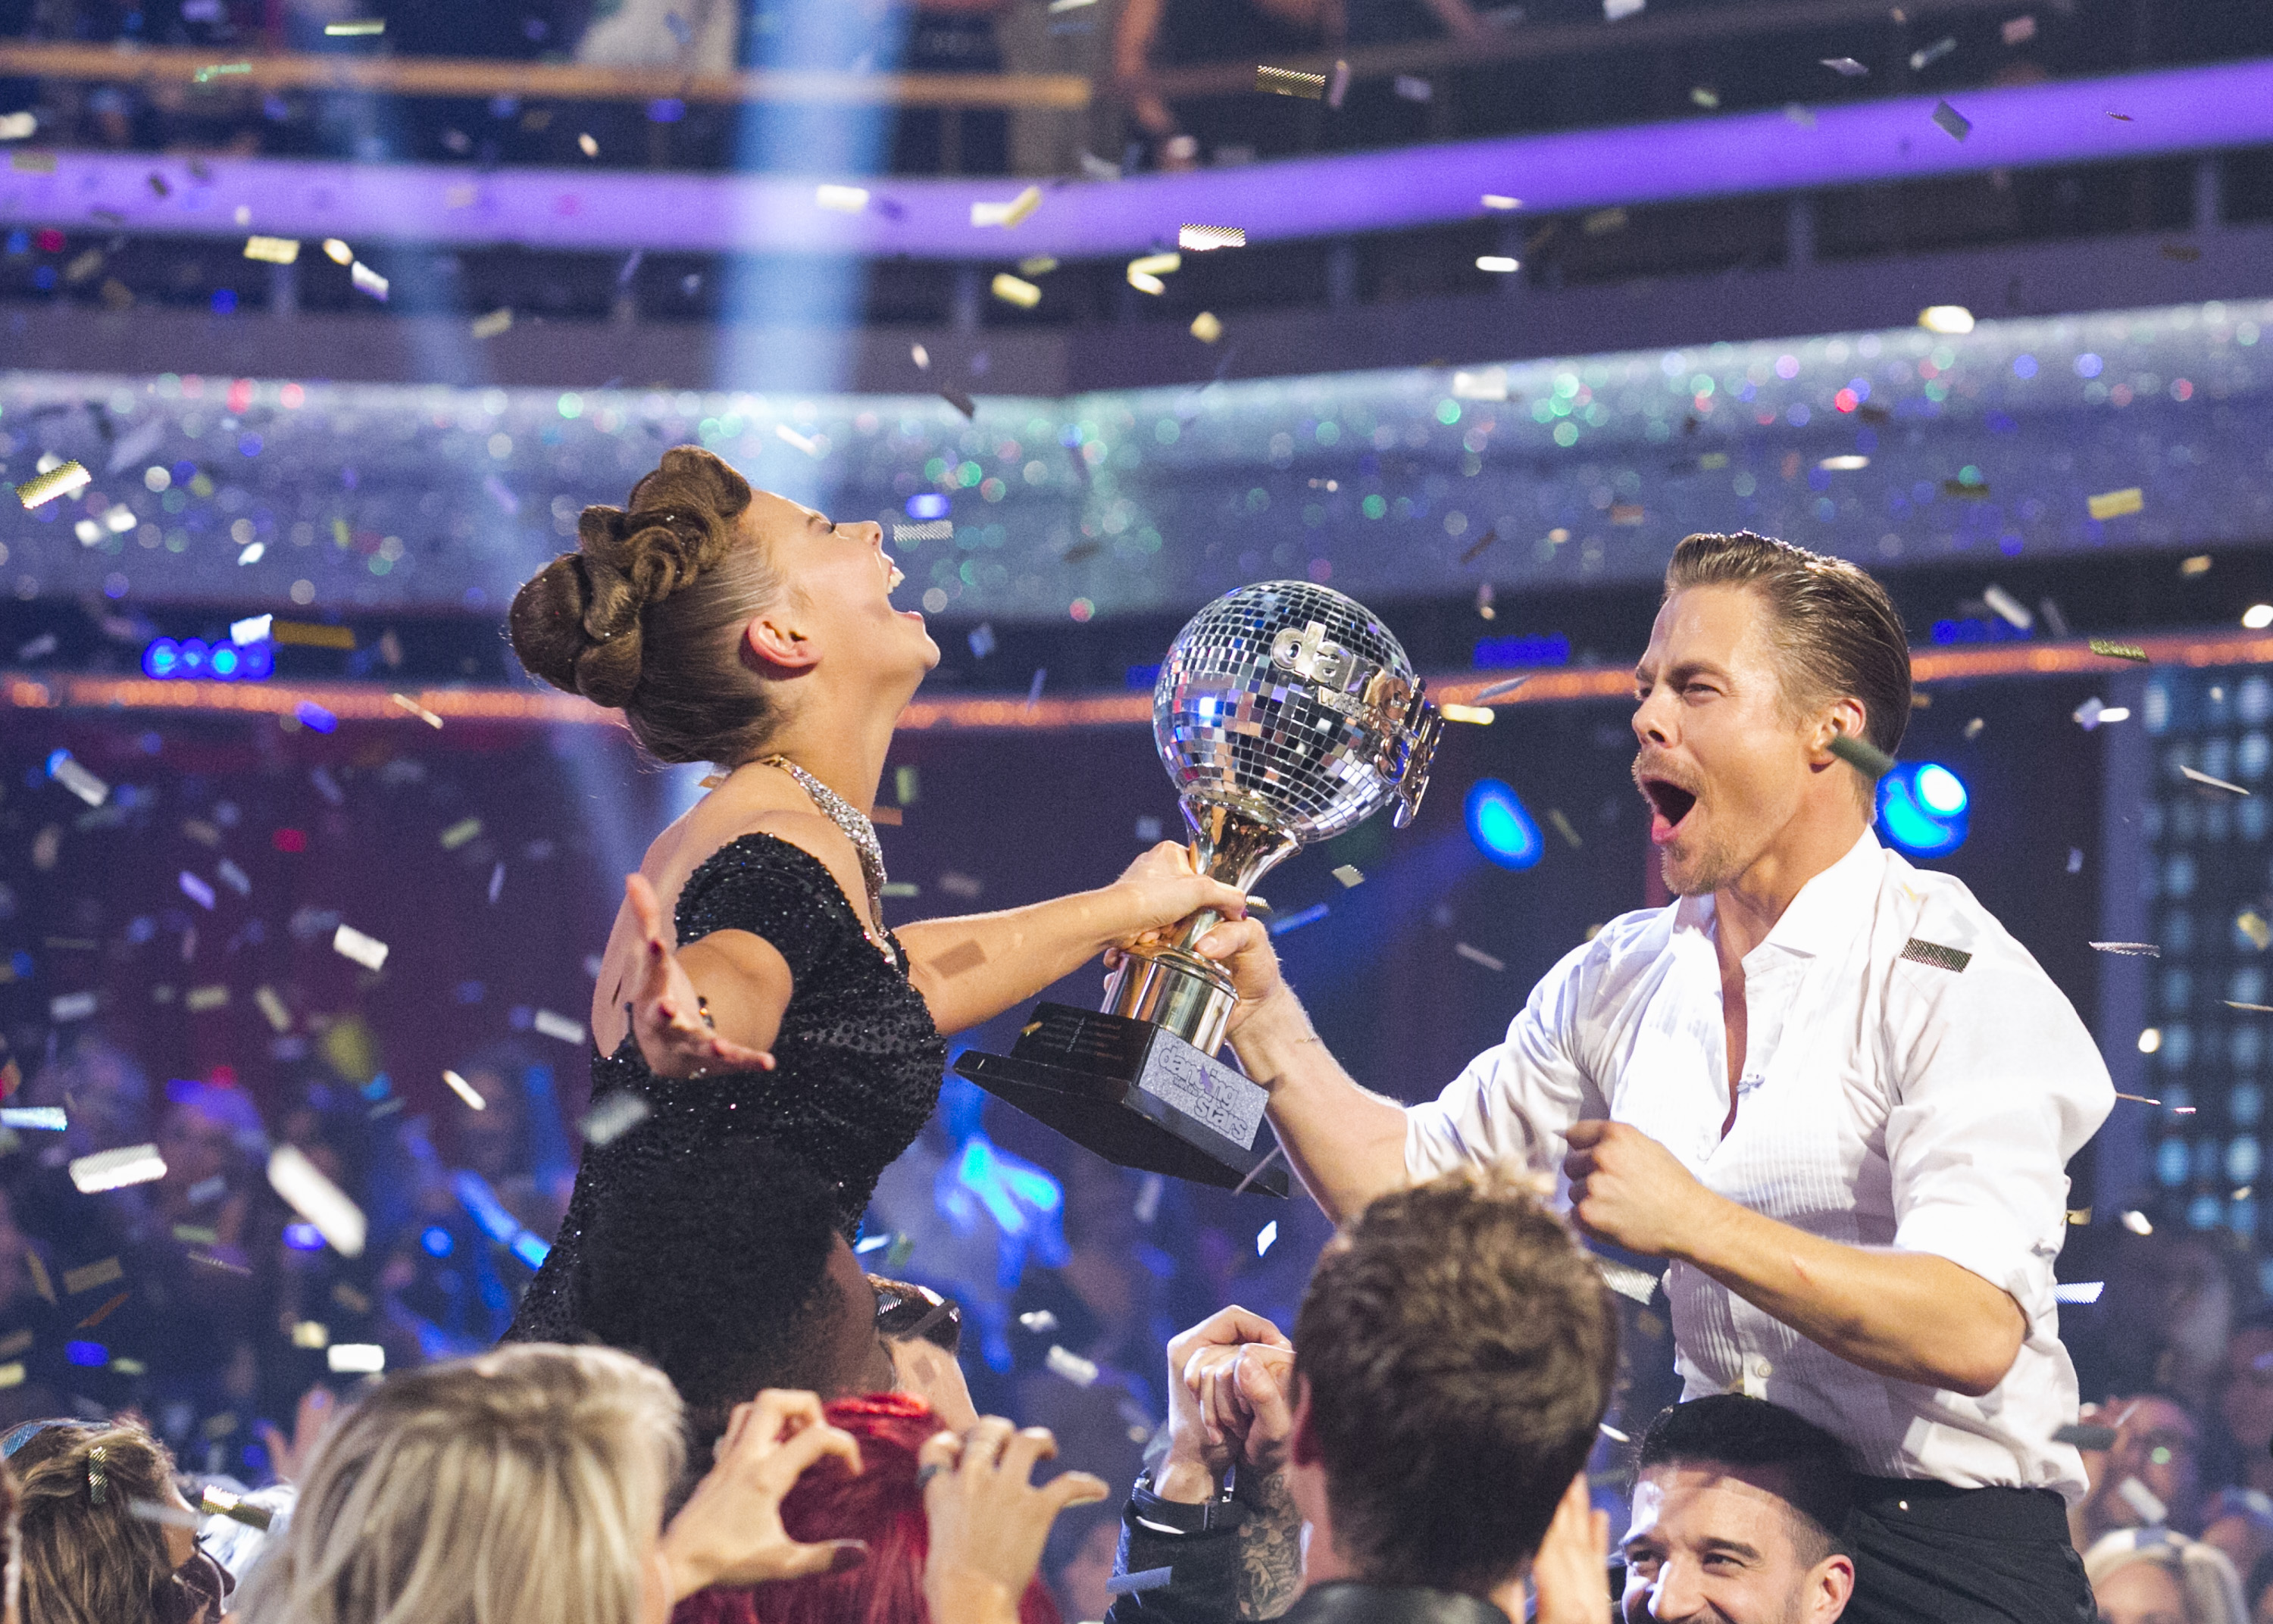 Bindi Irwin and Derek Hough being lifted above the crowd with the Mirrorball Trophy after they win Season 21 of 'Dancing With the Stars'